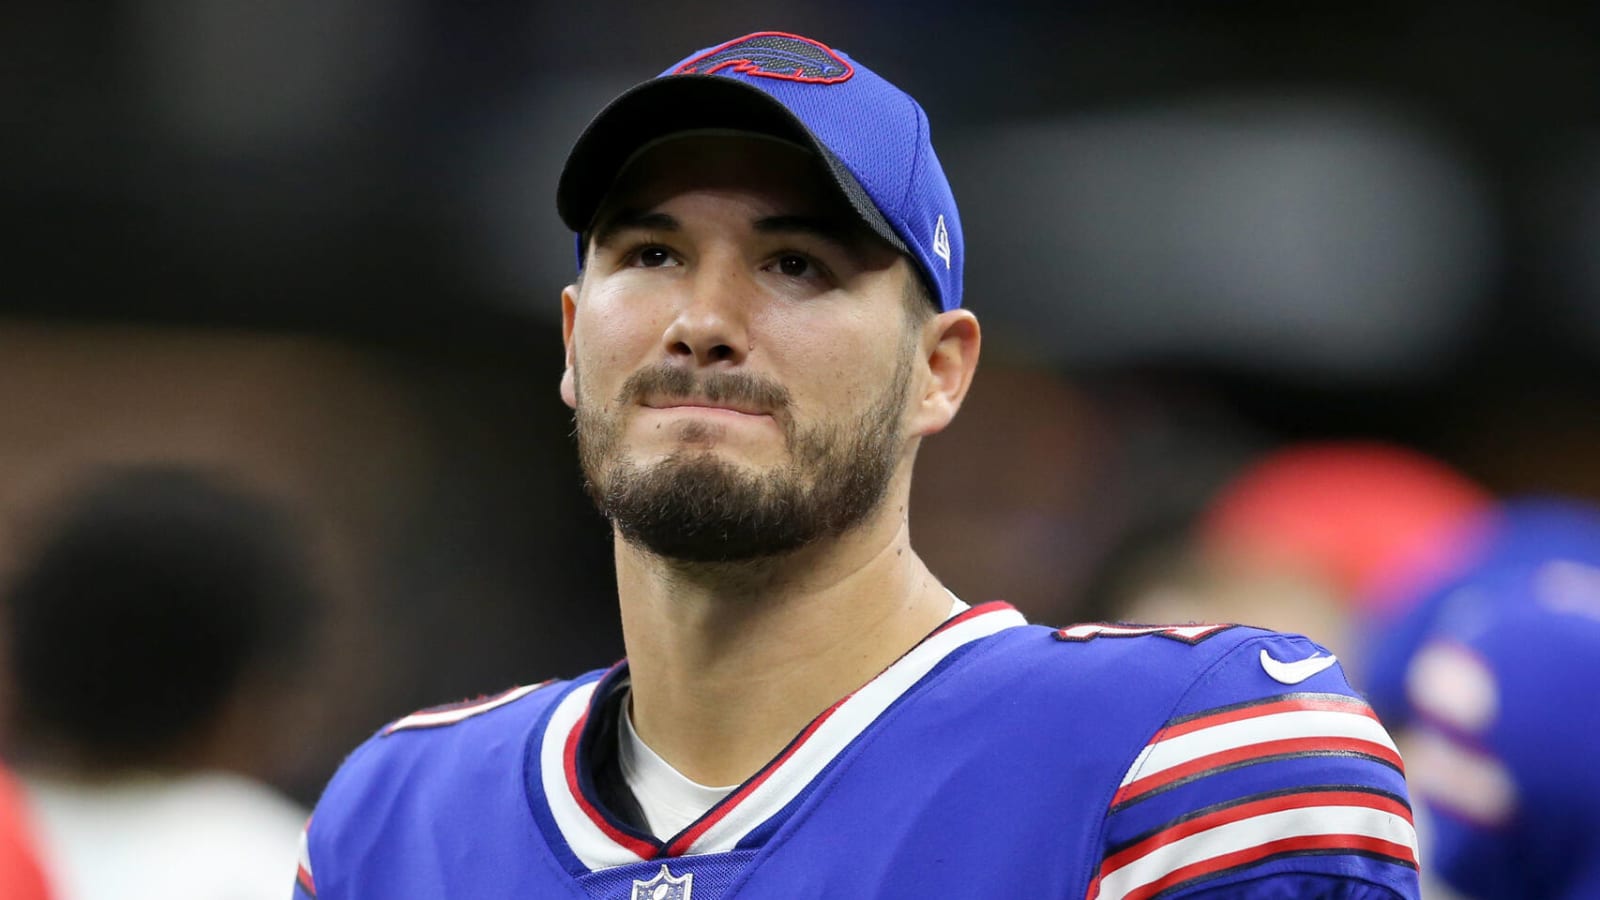 Giants likely to target QB Mitchell Trubisky